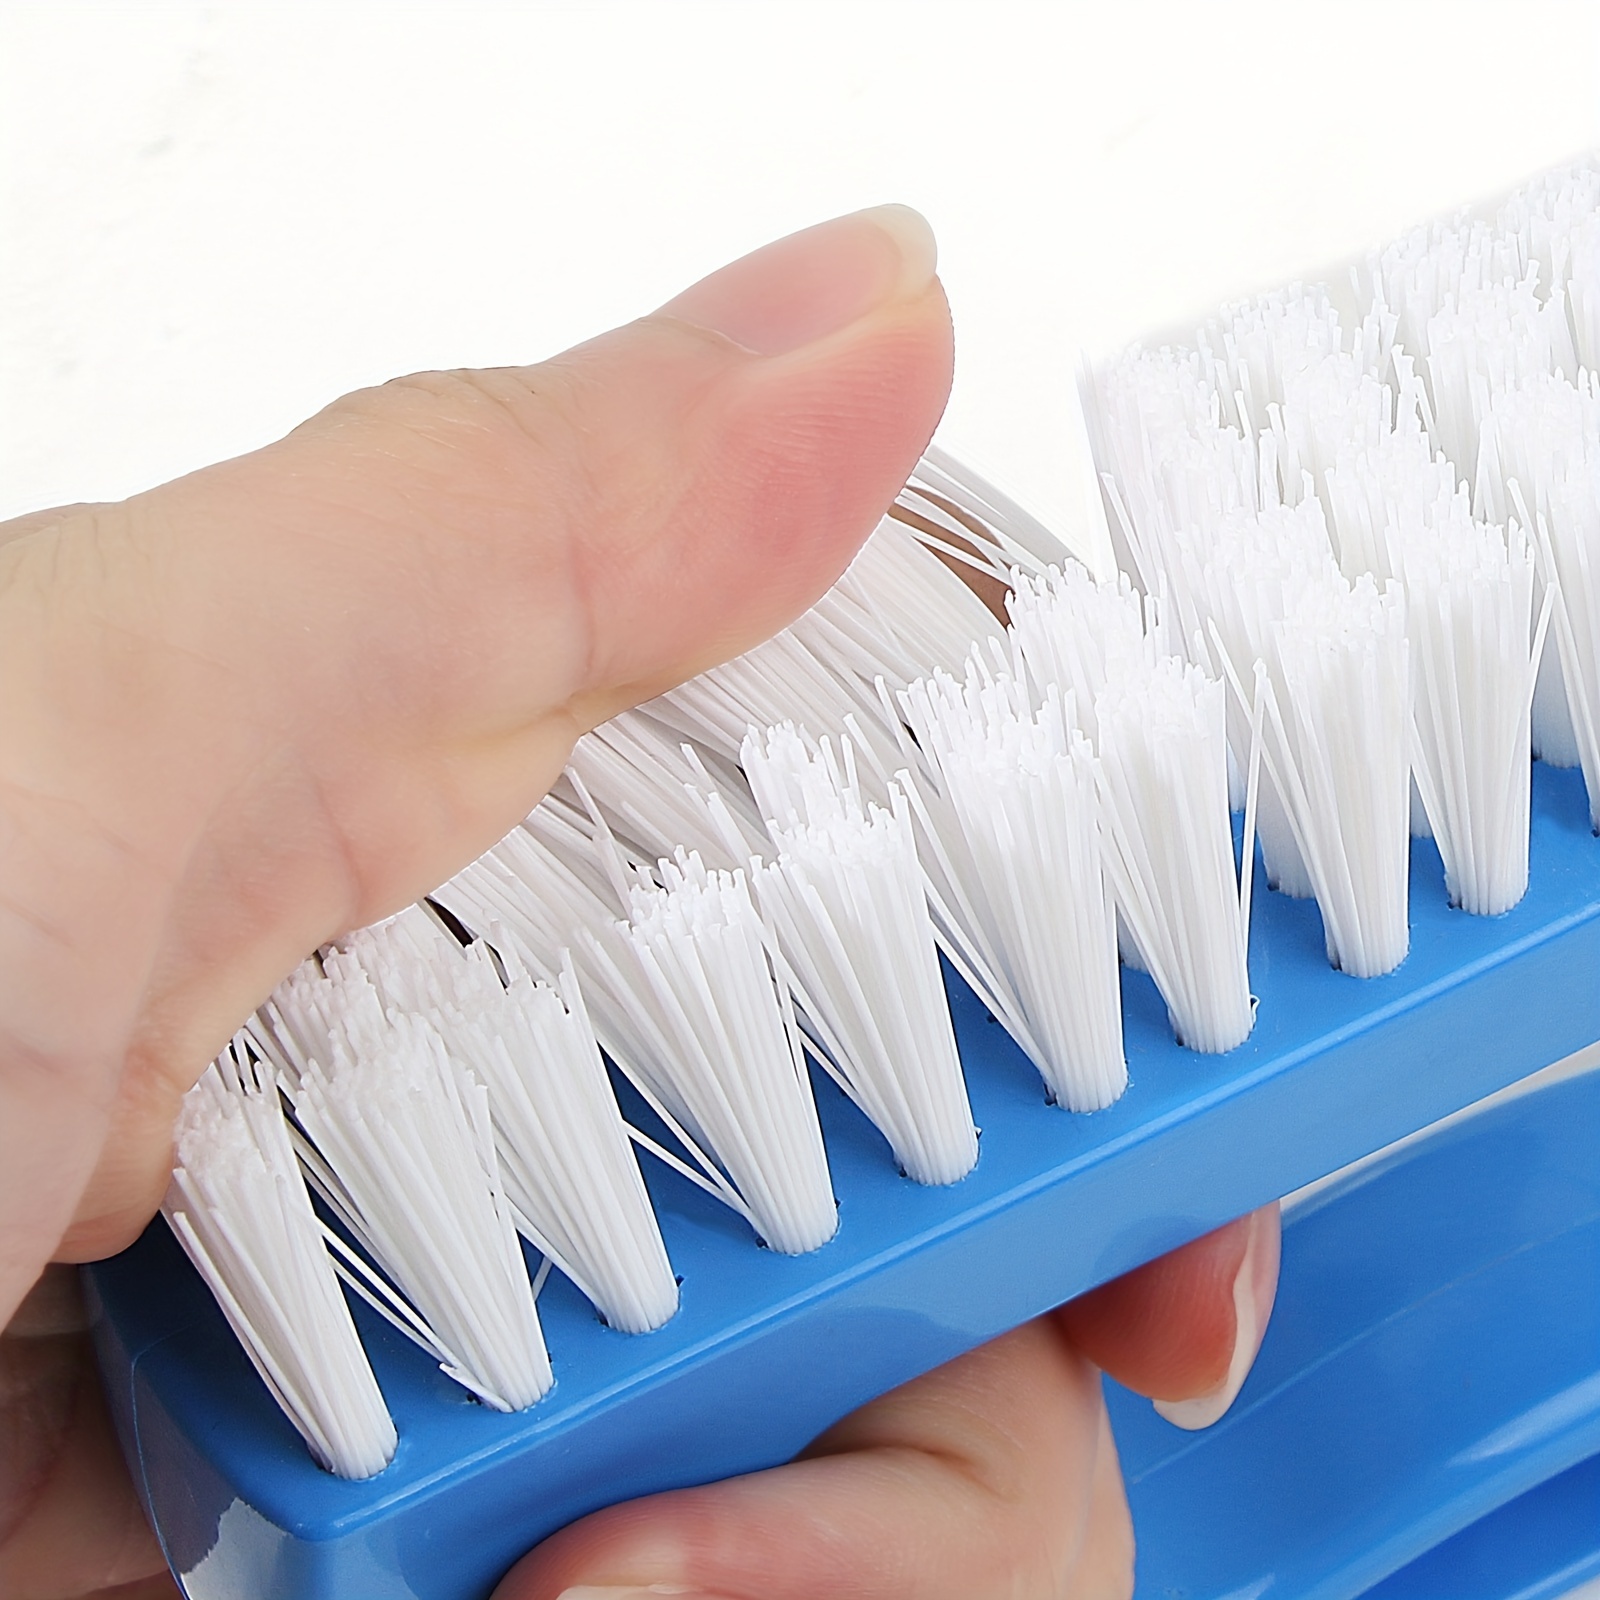 Grout Scrubber Brush for Shower, Tile Cleaning Tool with Long Handle, 49'' Grout  Cleaner Brushes for Bathroom Floors